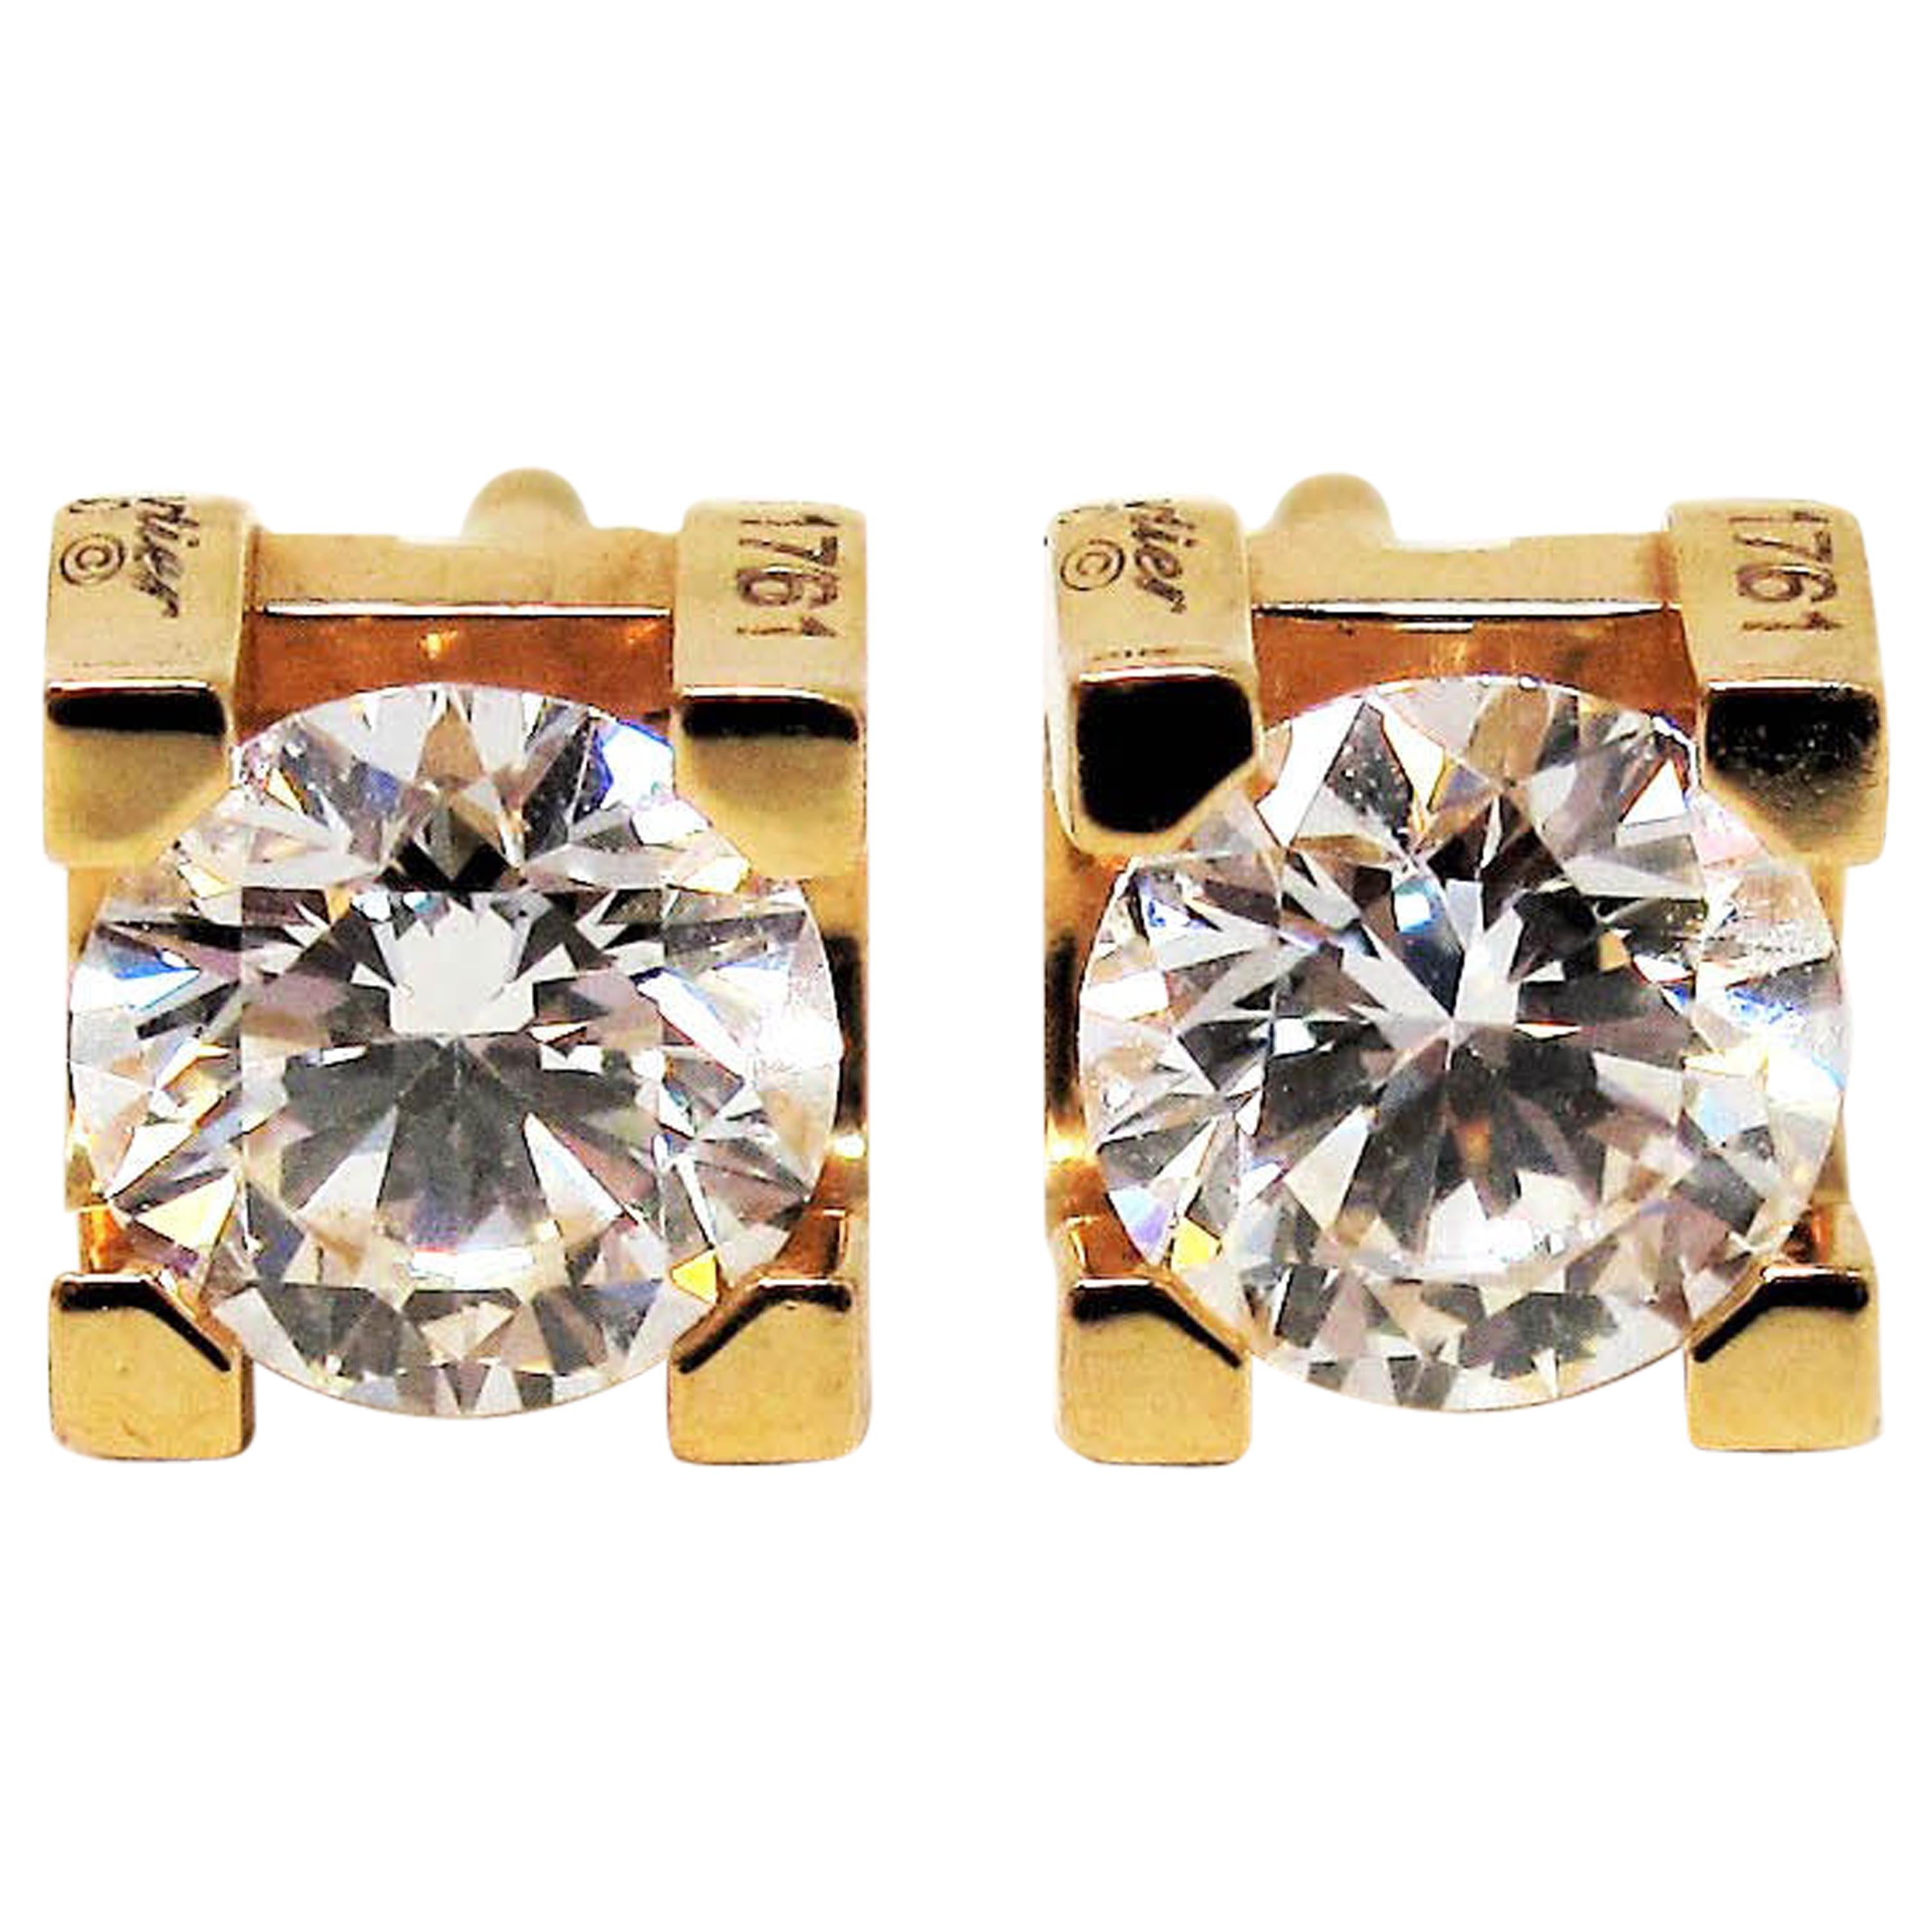 Cartier C Round Diamond Solitaire Stud Earrings Pink Gold 1.00 Carat Total